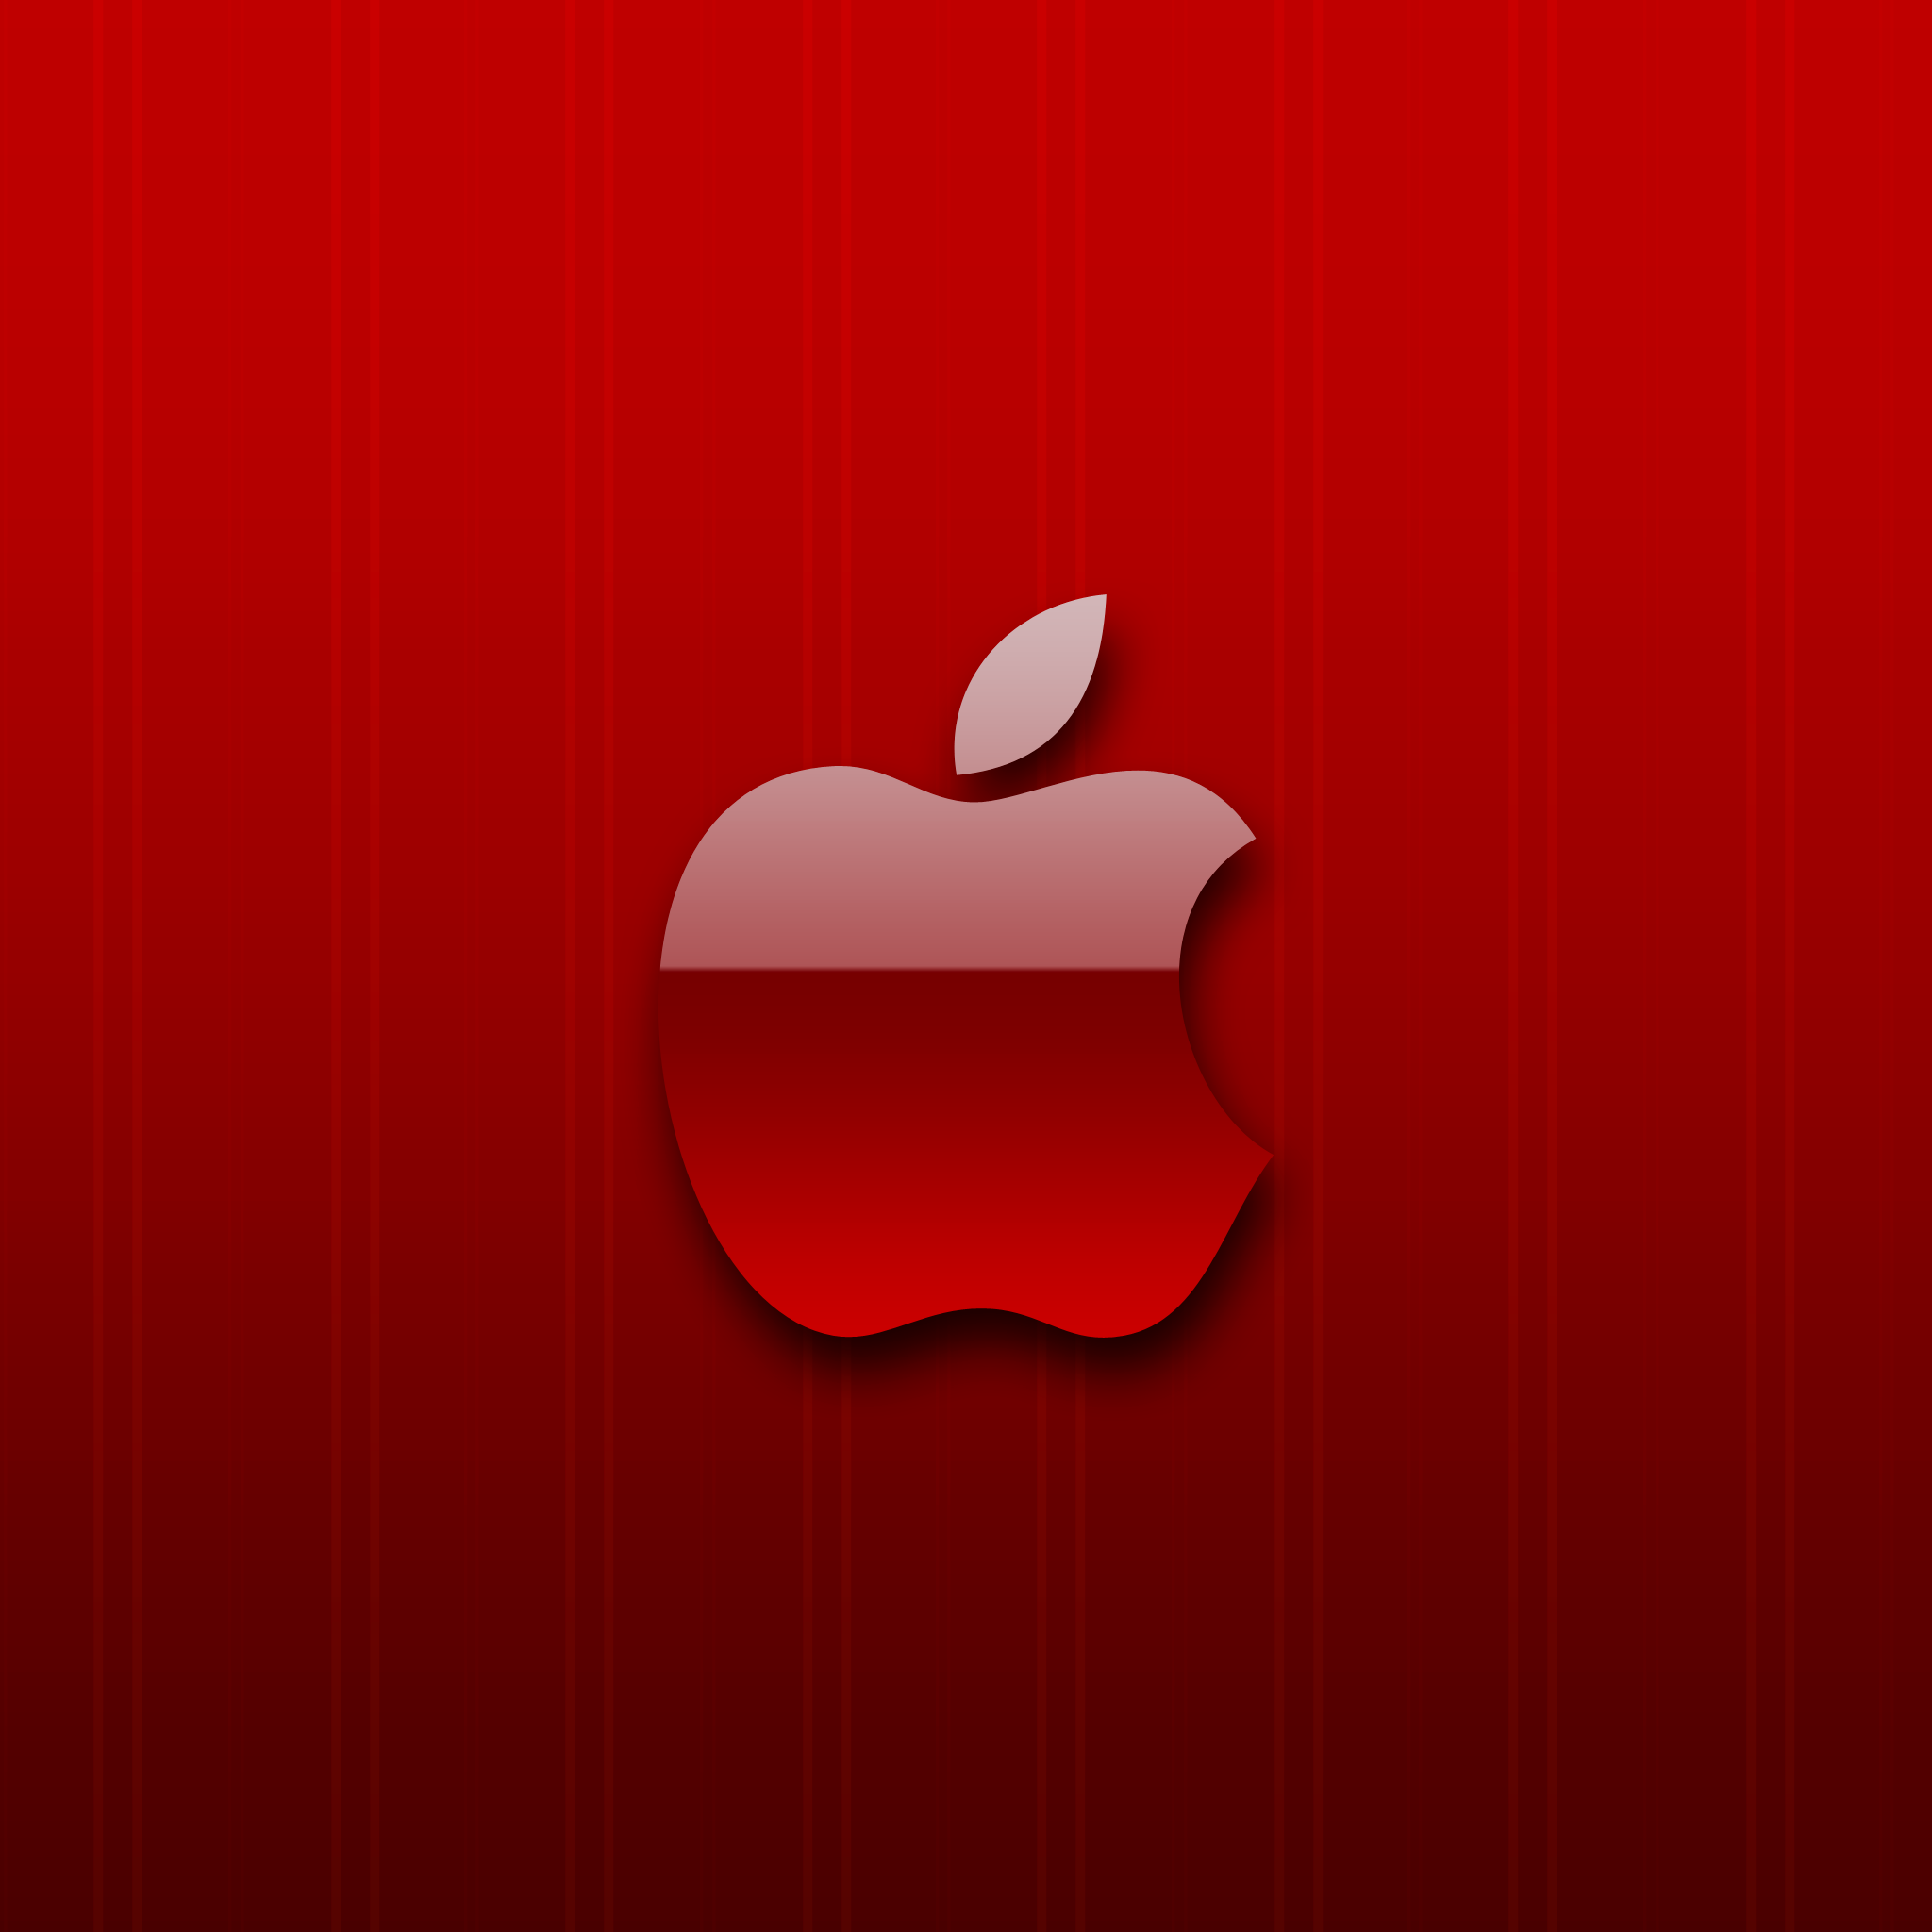  iPad Apple Red 2048 x 2048 Wallpapers   apple logo red mobile9